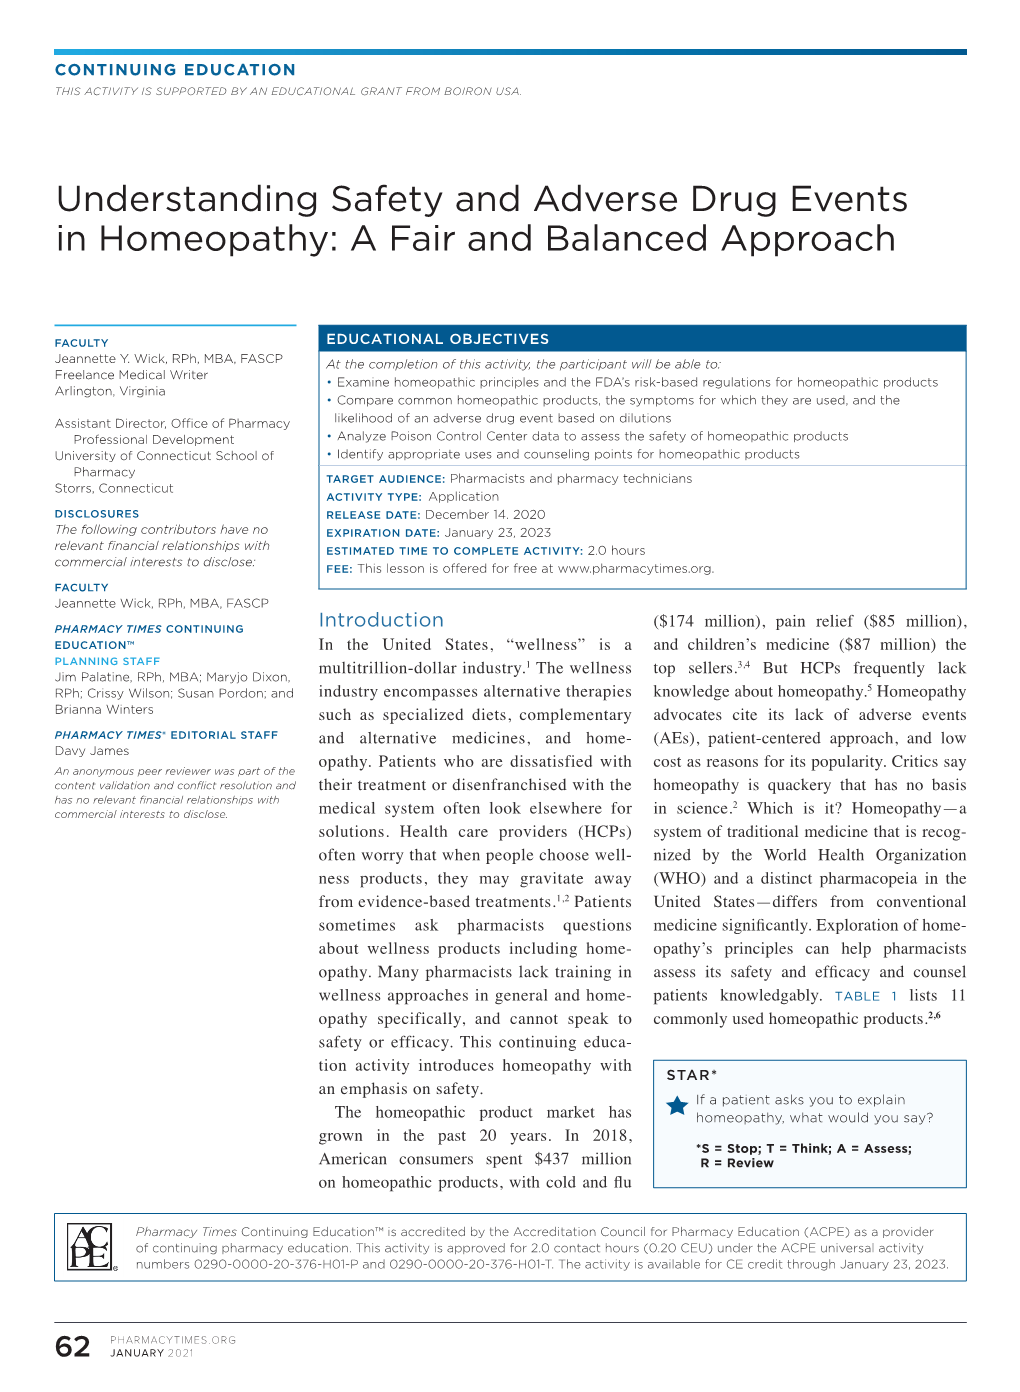 Understanding Safety and Adverse Drug Events in Homeopathy: a Fair and Balanced Approach